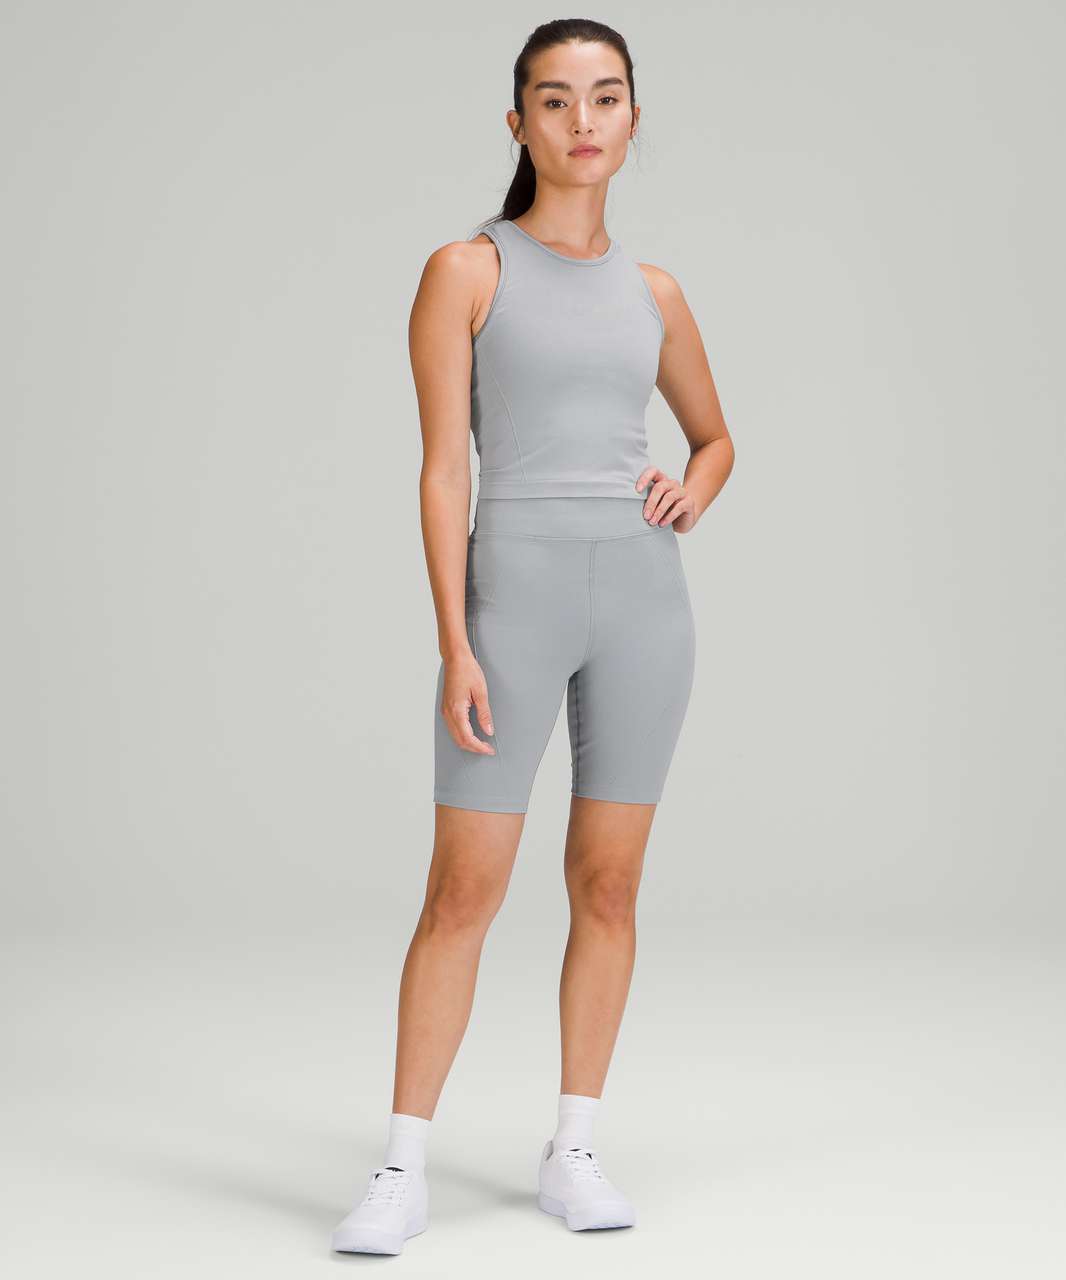 Lululemon For the Chill of It Crop Tank - Rhino Grey